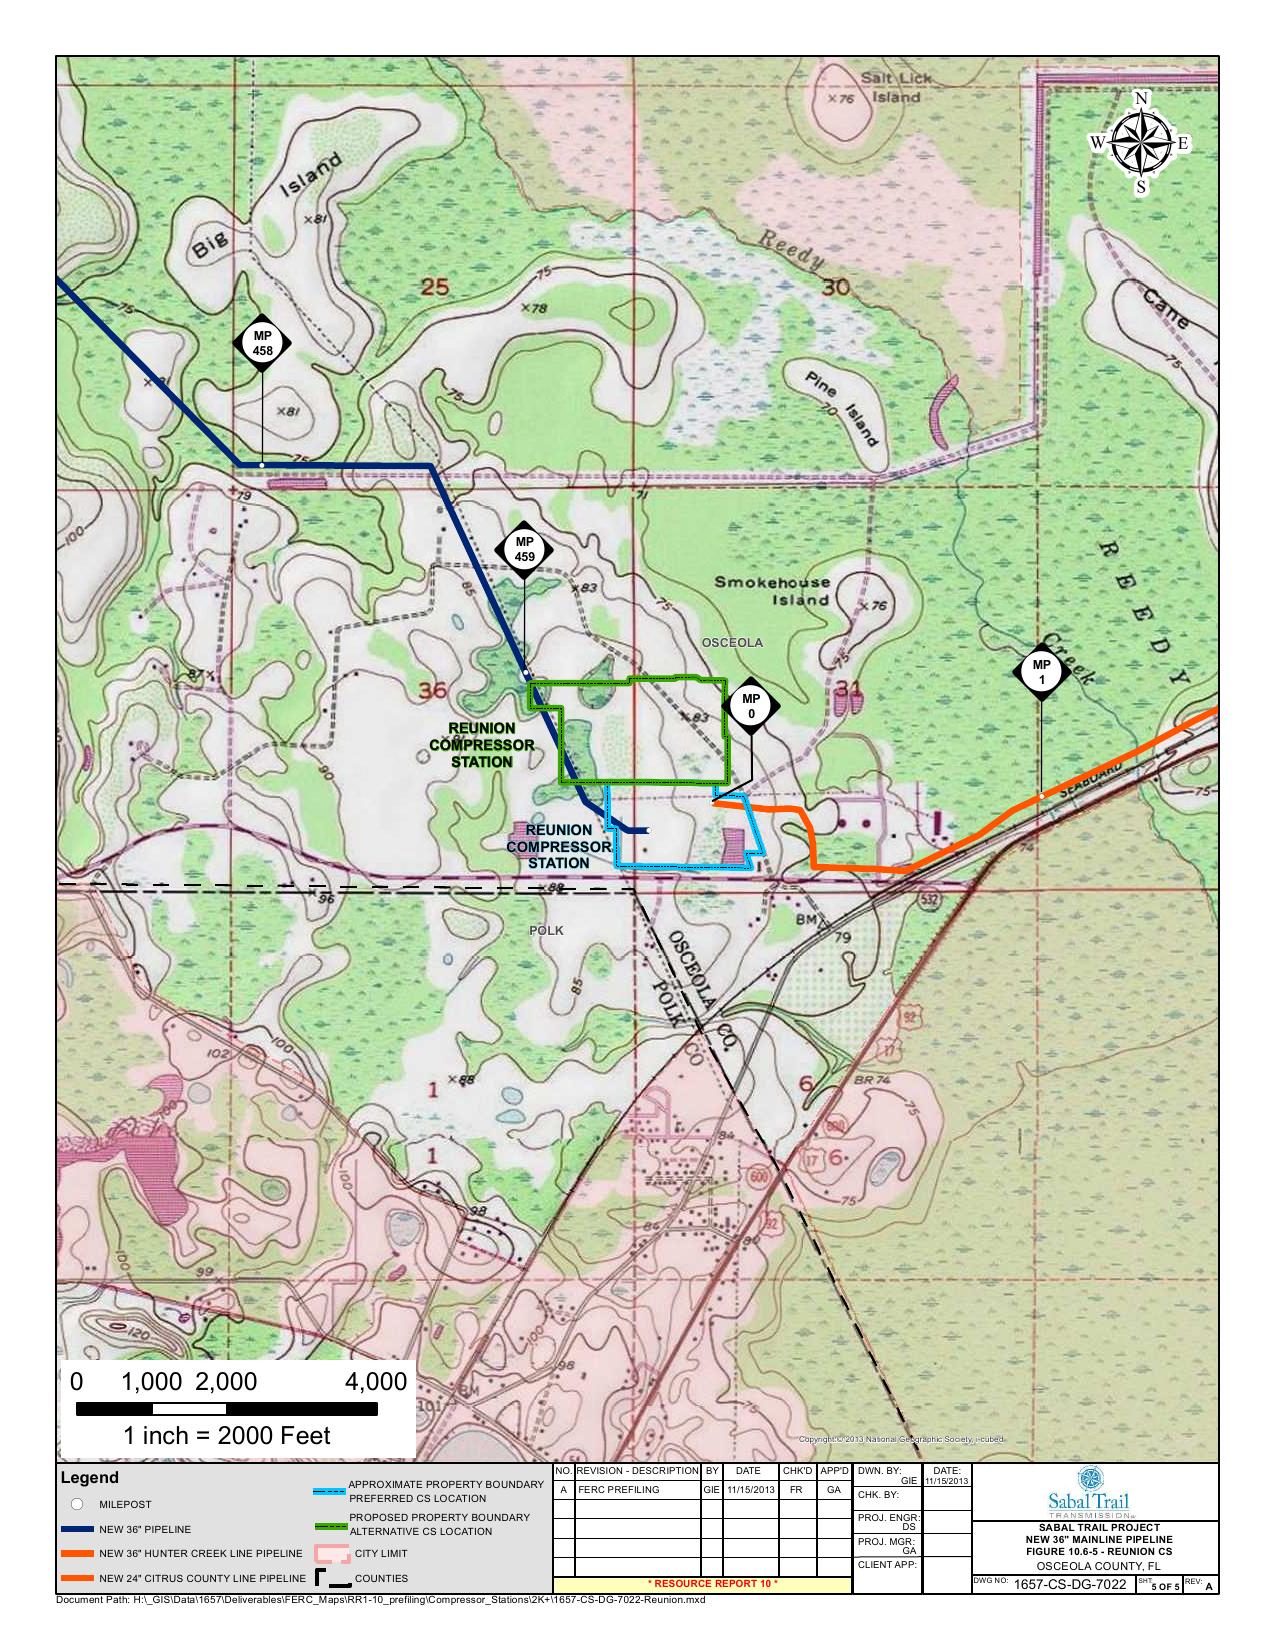 Reunion Compressor Station, Osceola County, Florida, in Alternatives, by Sabal Trail Transmission, for FERC Docket No. PF14-1-000, 15 November 2013, converted by SpectraBusters